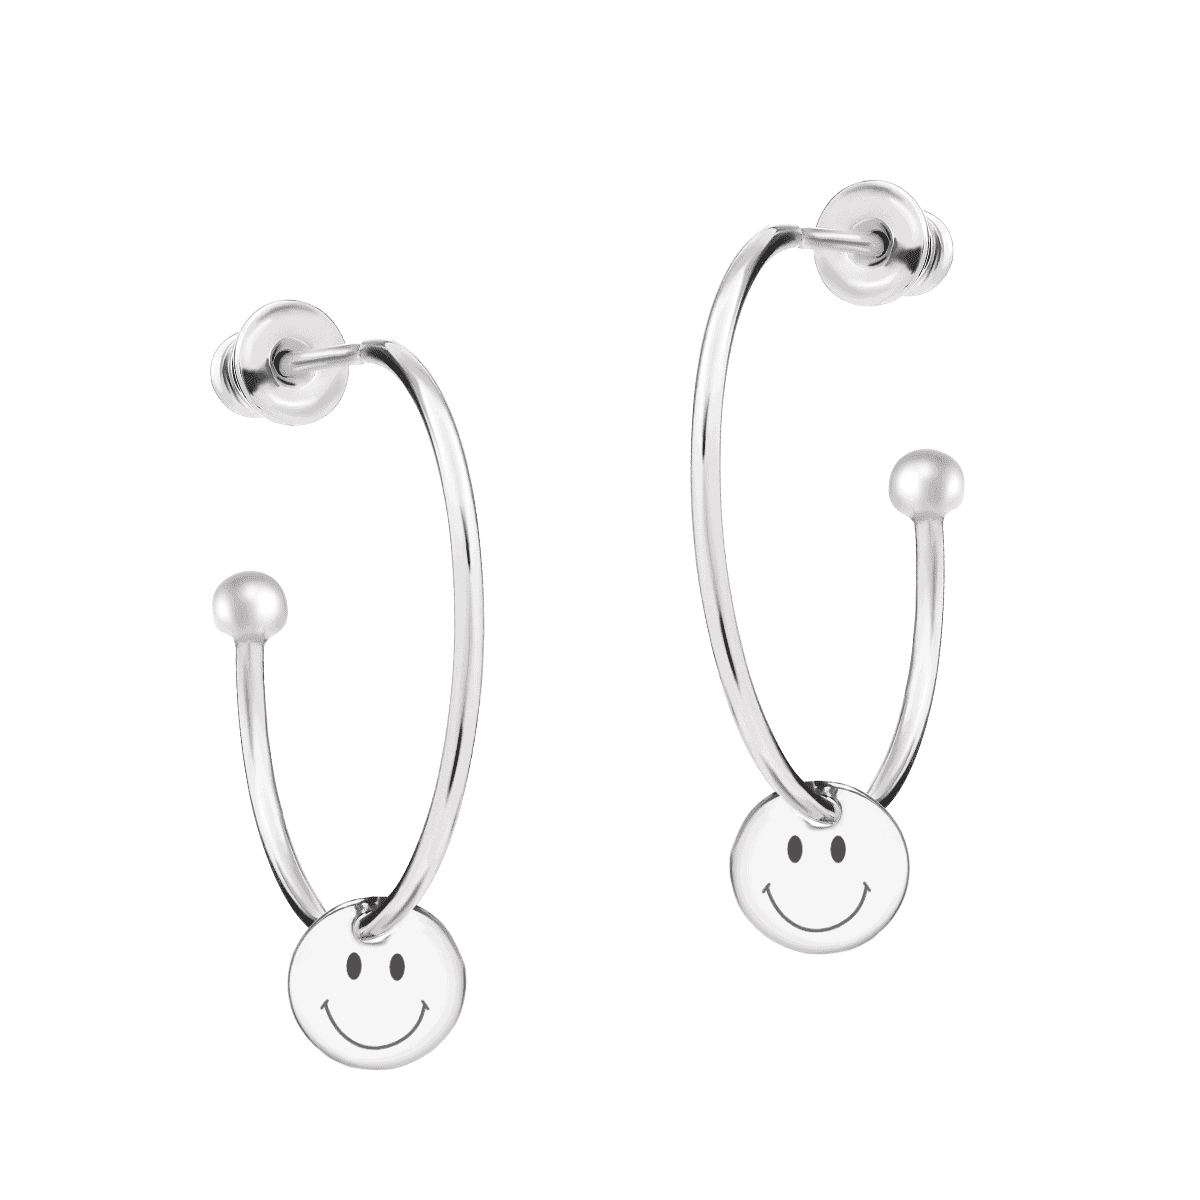 Silver hoop earrings with pendant on a light background